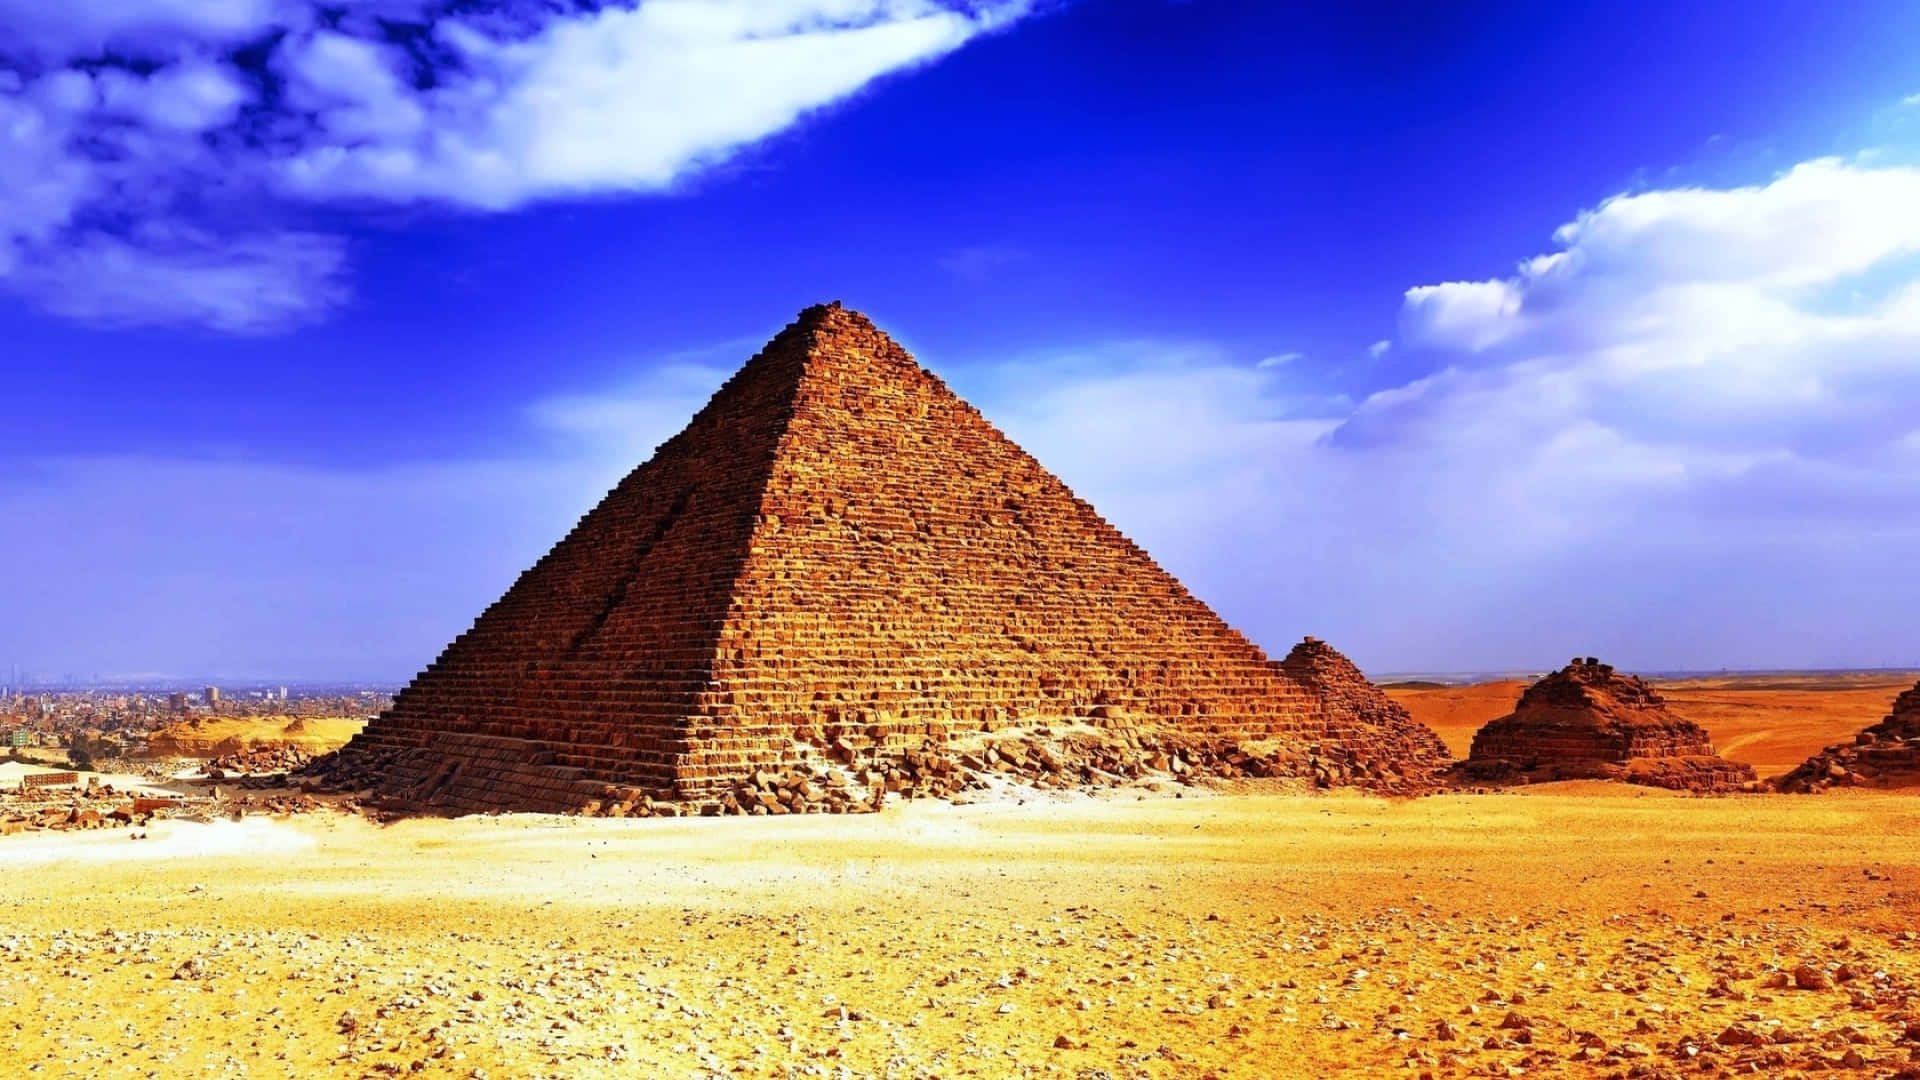 A View Of The Ancient Egyptian Pyramids